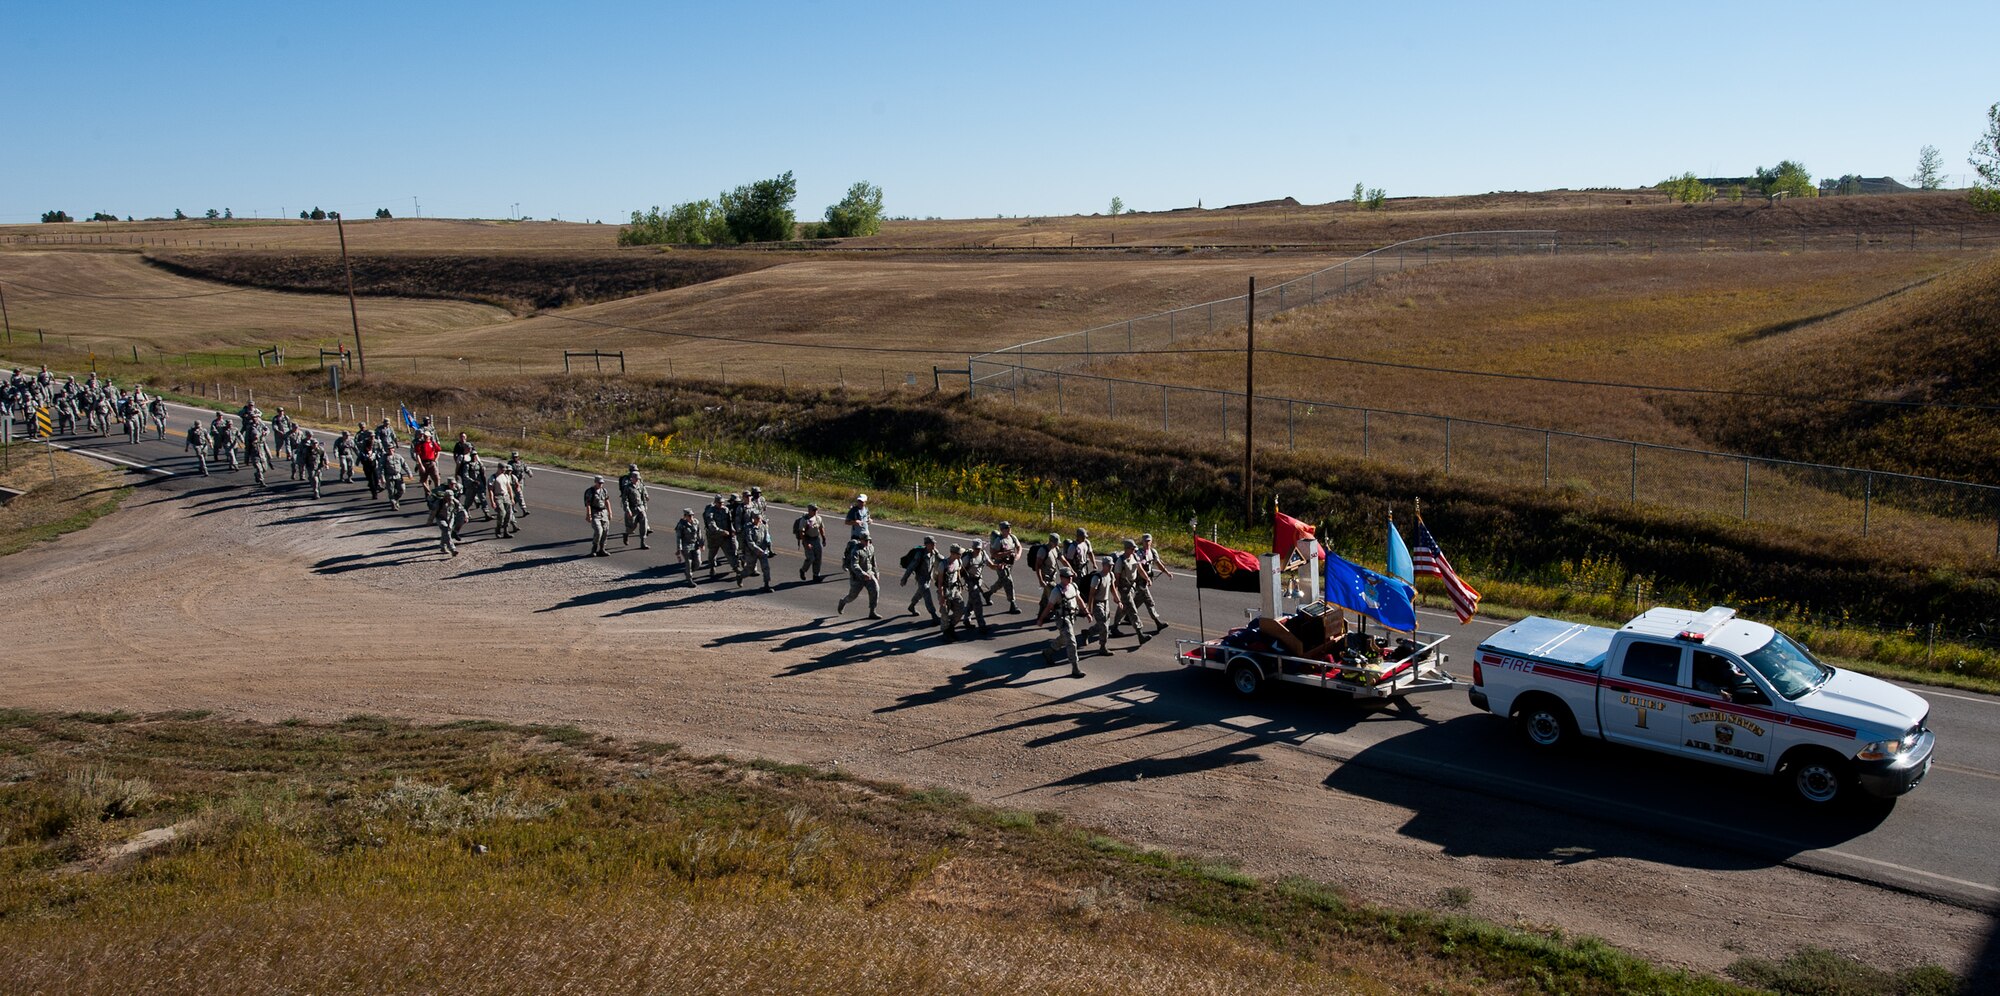 A multitude of nearly 150 Airmen and first responders from surrounding communities begin their 11-mile trek during a 9/11 Remembrance Ruck March on Ellsworth Air Force Base, S.D., Sept. 8, 2012. The participants traveled from the Pride Hangar, out the base's commercial gate and down the service road along Interstate 90, concluding their march with a special ceremony at an area shopping center as part of a Disaster Awareness and Safety Day organized by the Rapid City Pennington County Emergency Management Office to honor the 11th anniversary of the 9/11 terrorist attacks. (U.S. Air Force photo by Airman 1st Class Kate Thornton-Maurer)